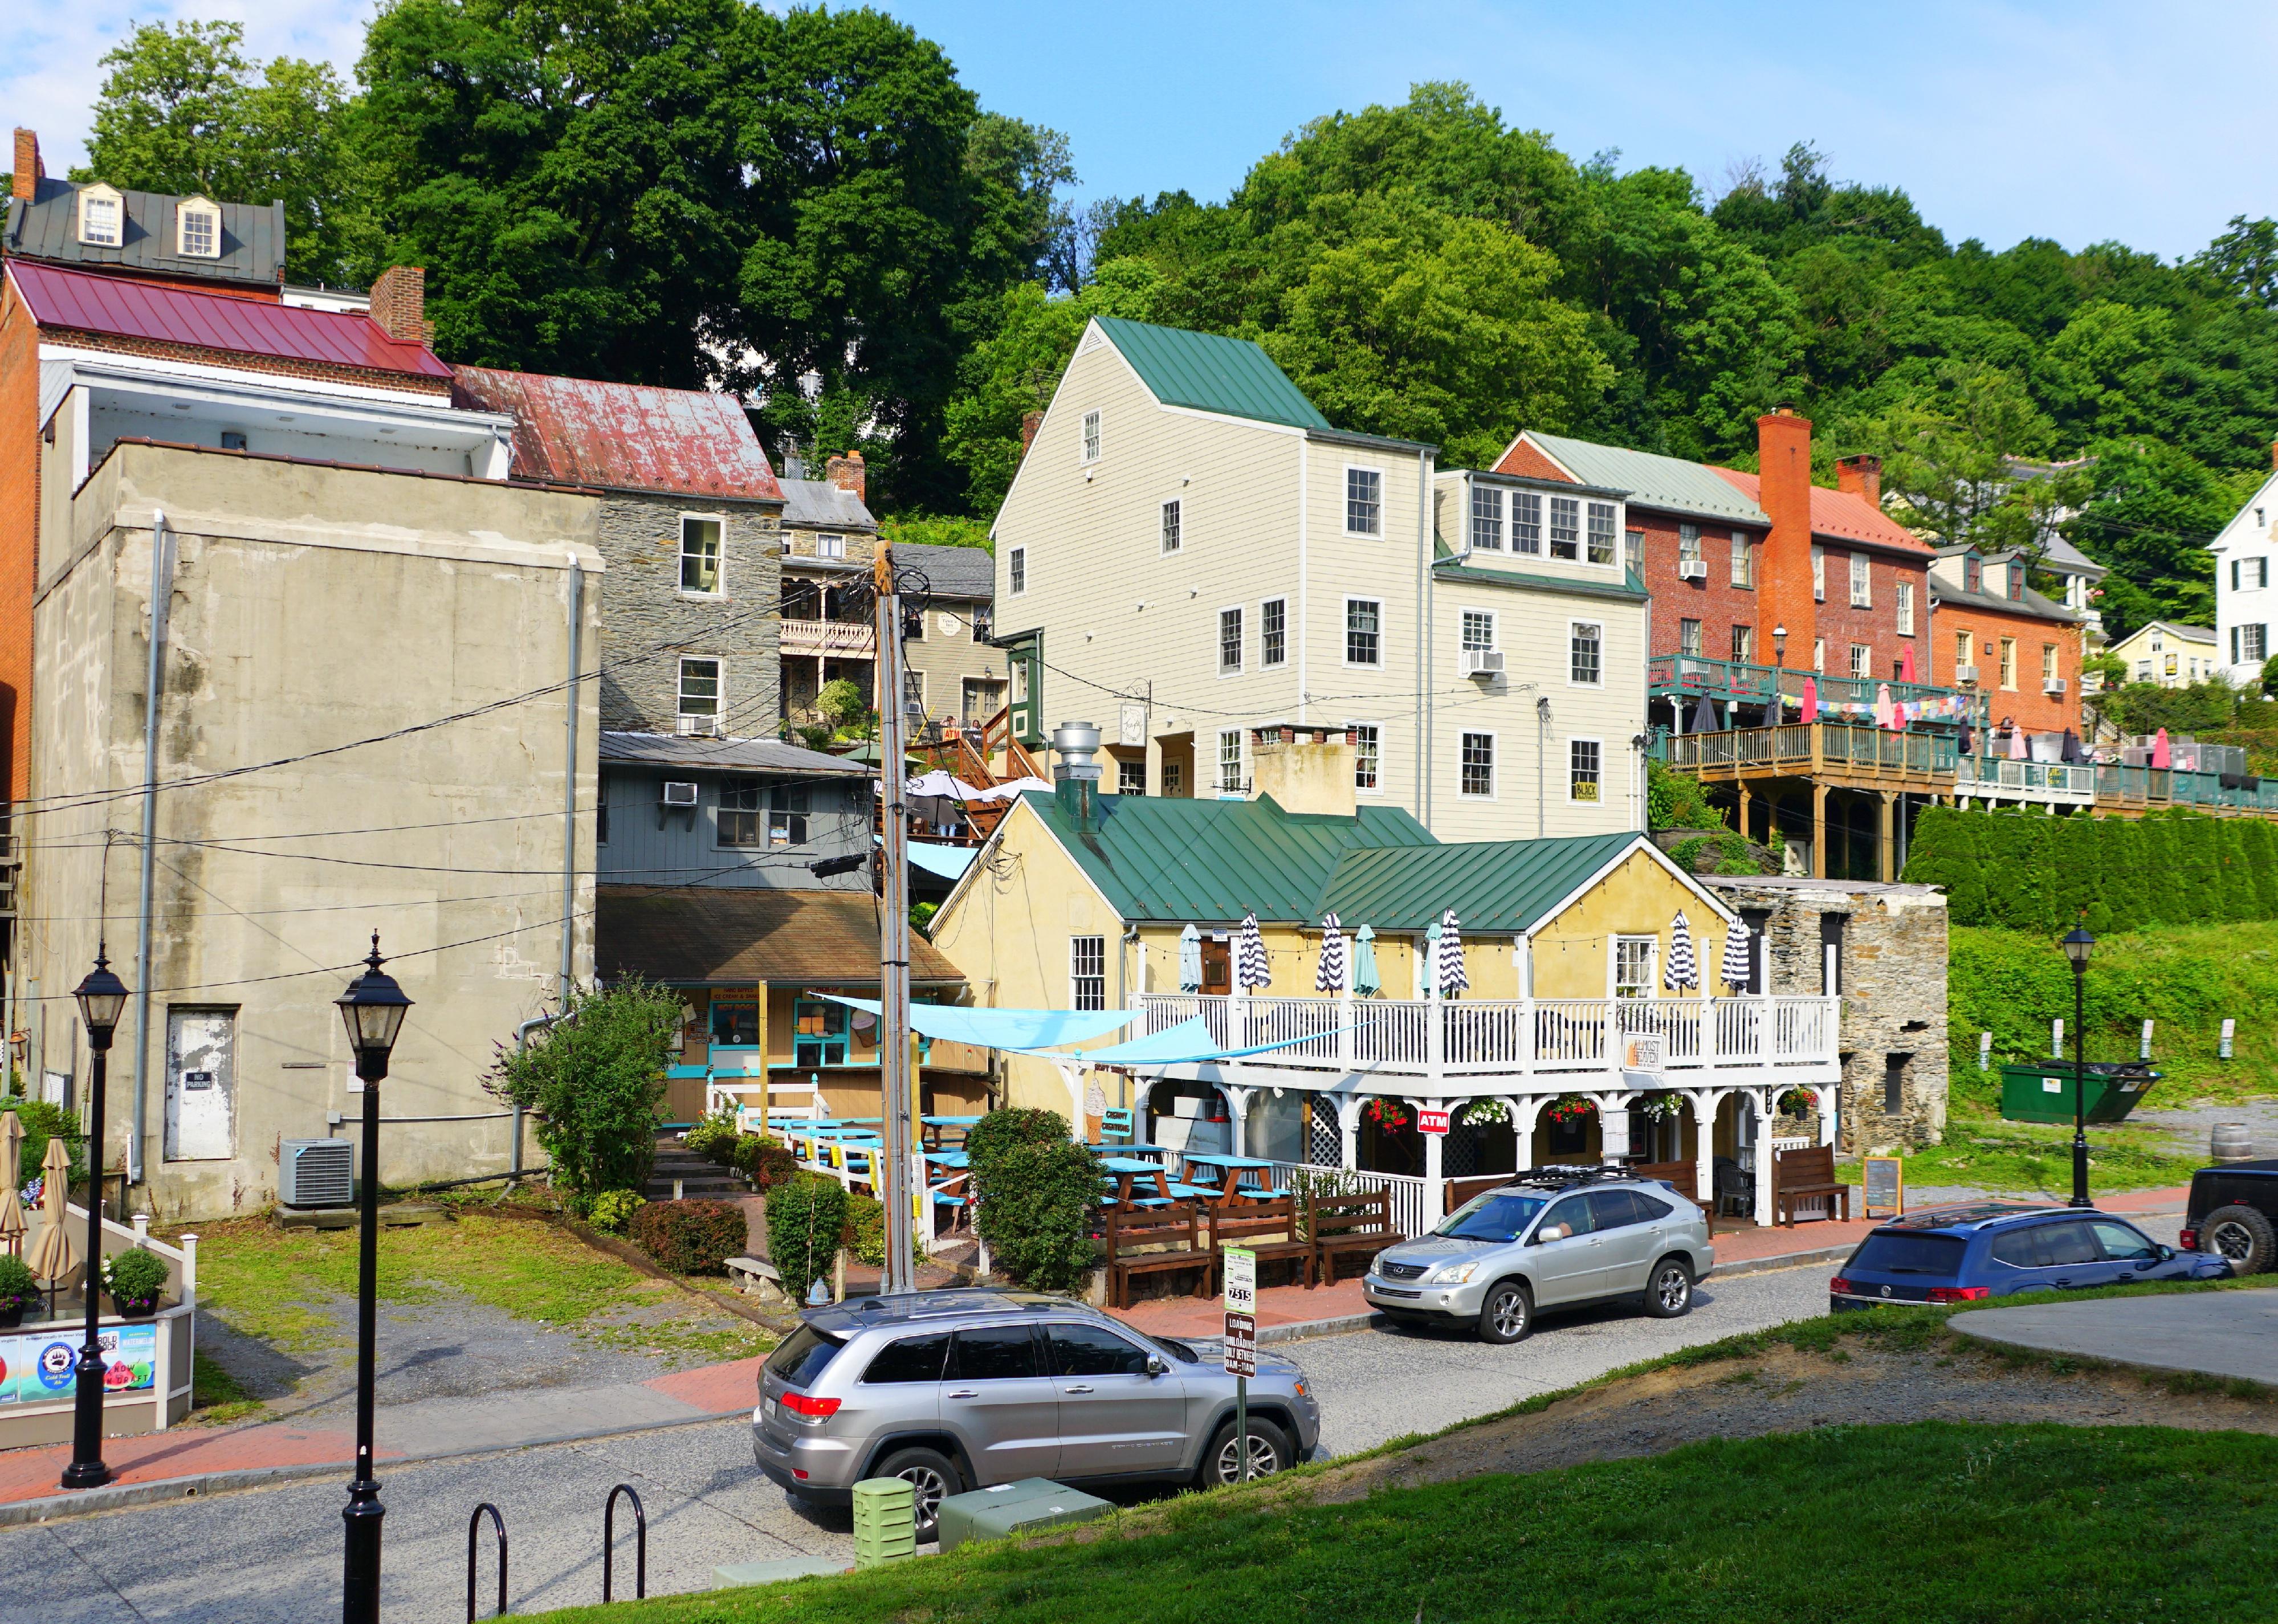 Residential and commercial buildings in West Virginia